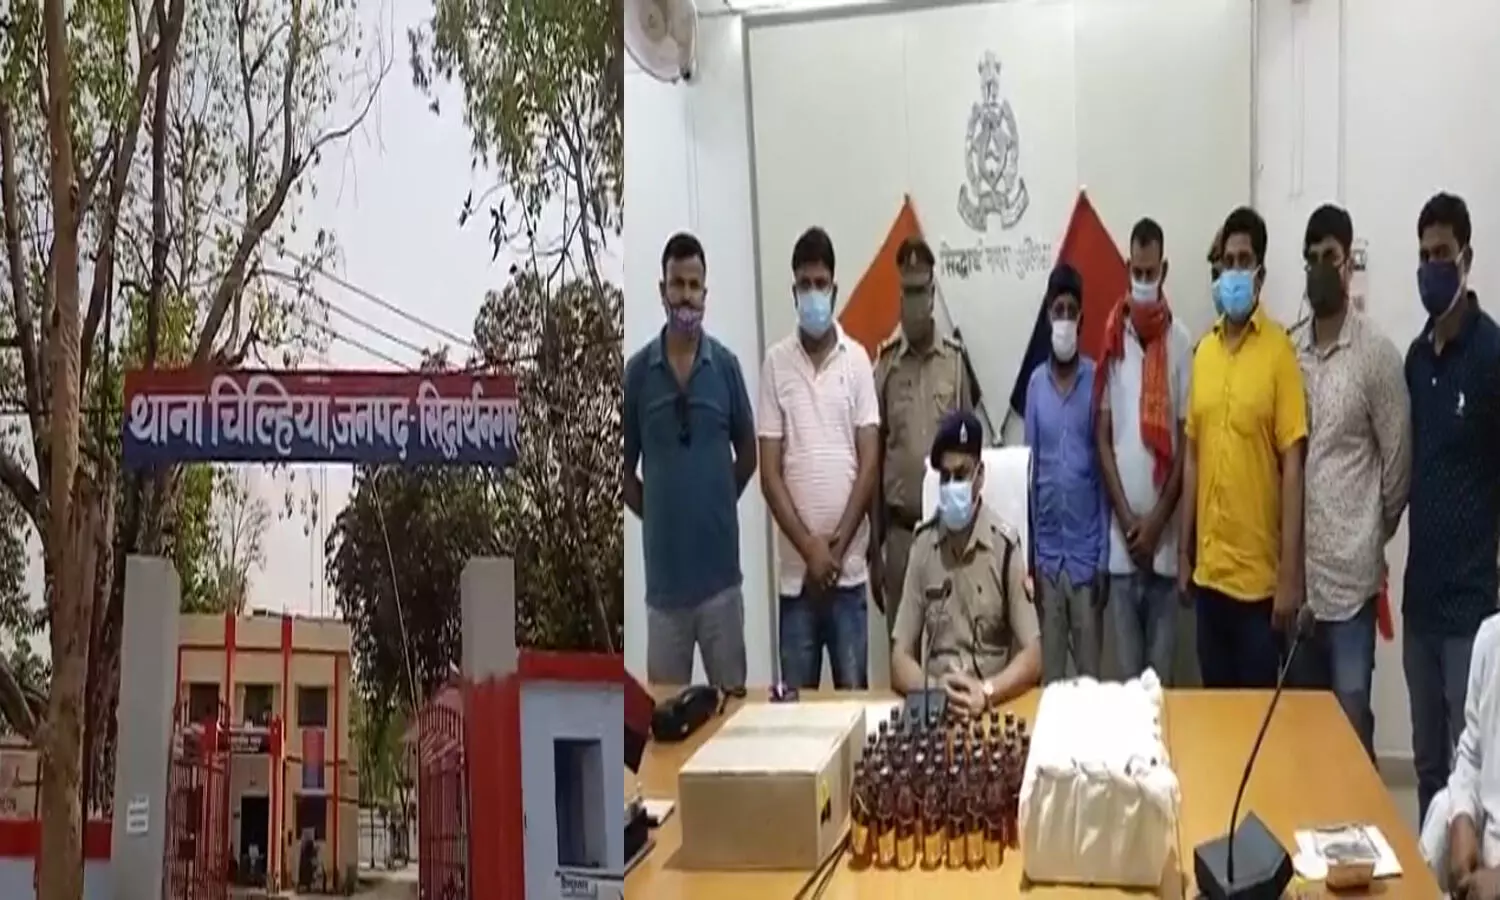 Siddharthnagar police recovered illicit liquor worth Rs 61 lakh and arrested 3 accused